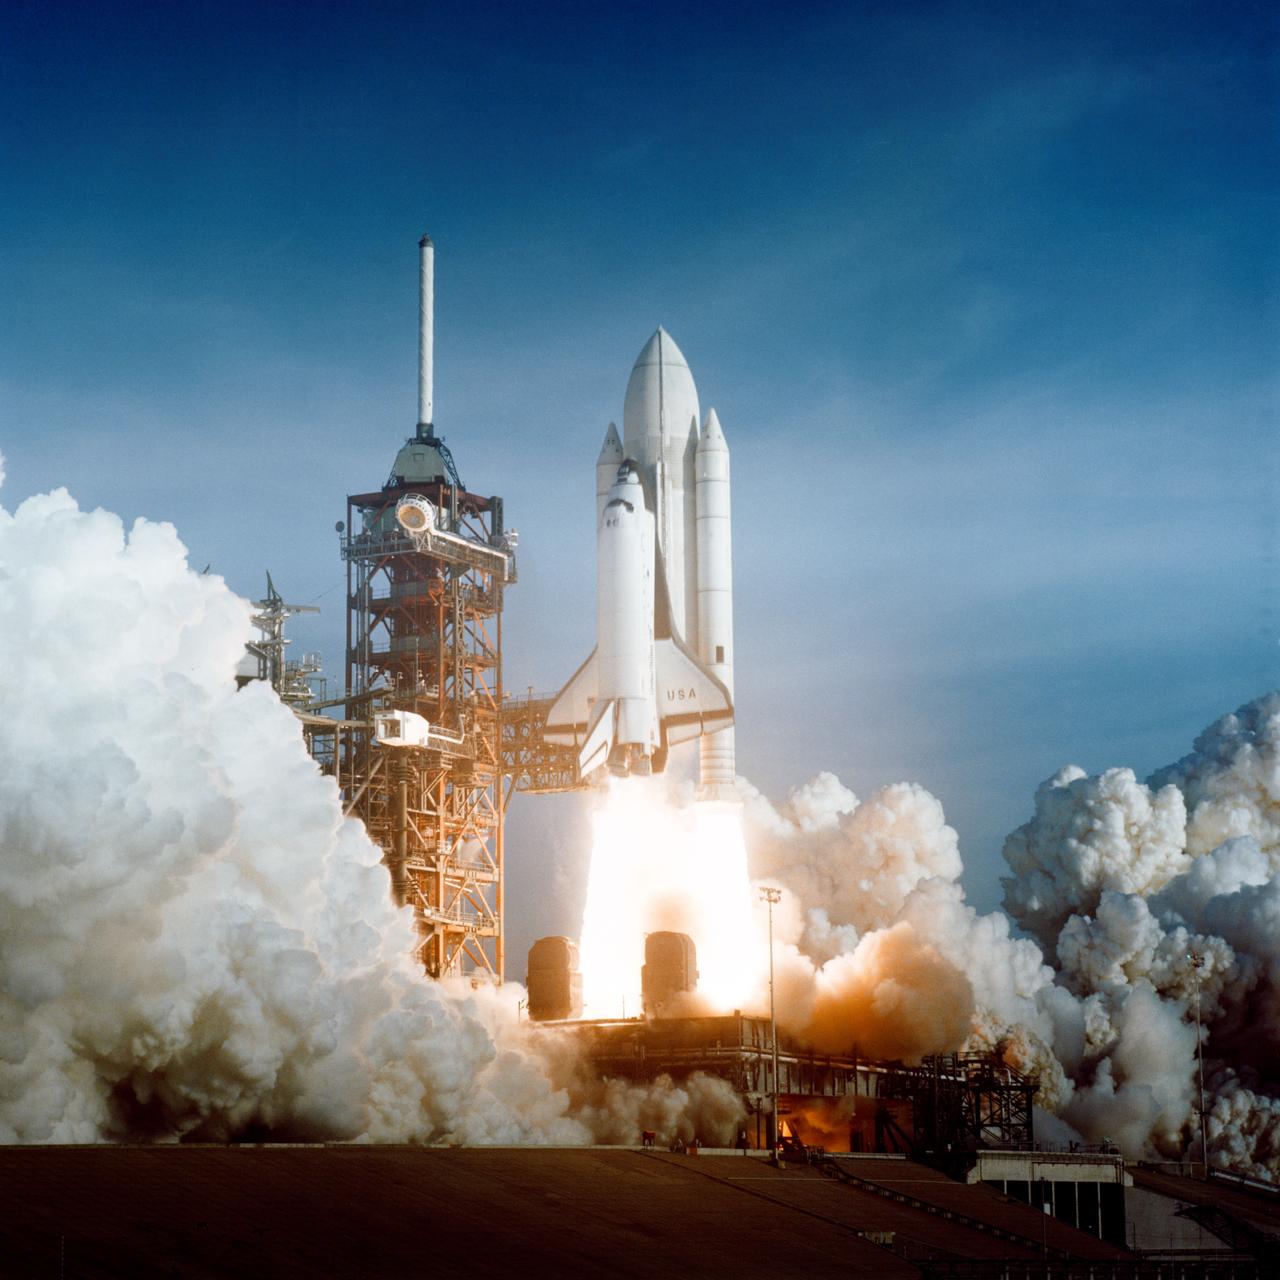 A space shuttle attached to a rocket lifting off